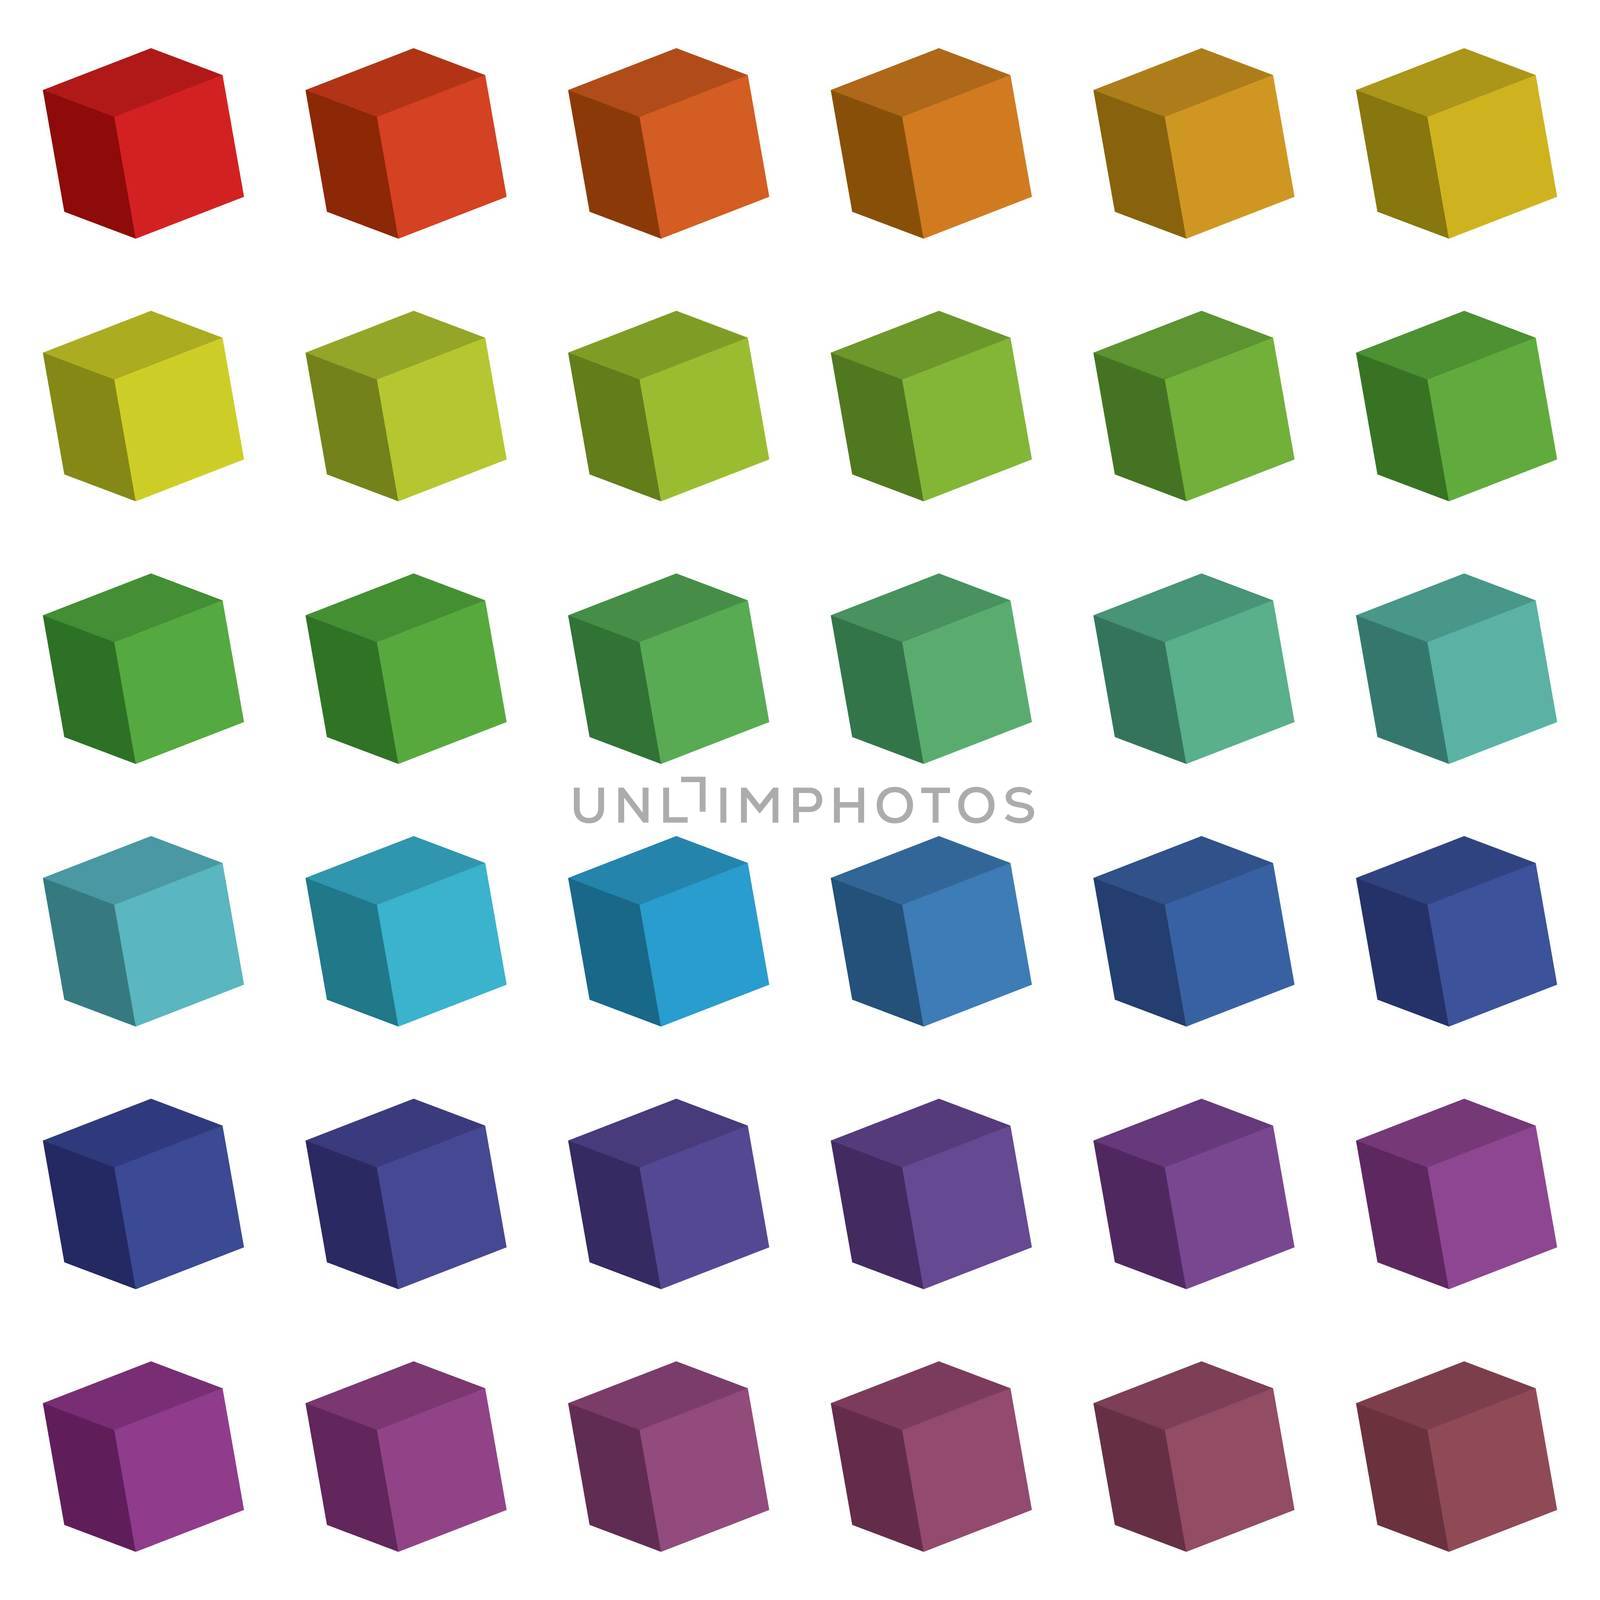 An Illustration of 3d cubes in various colours